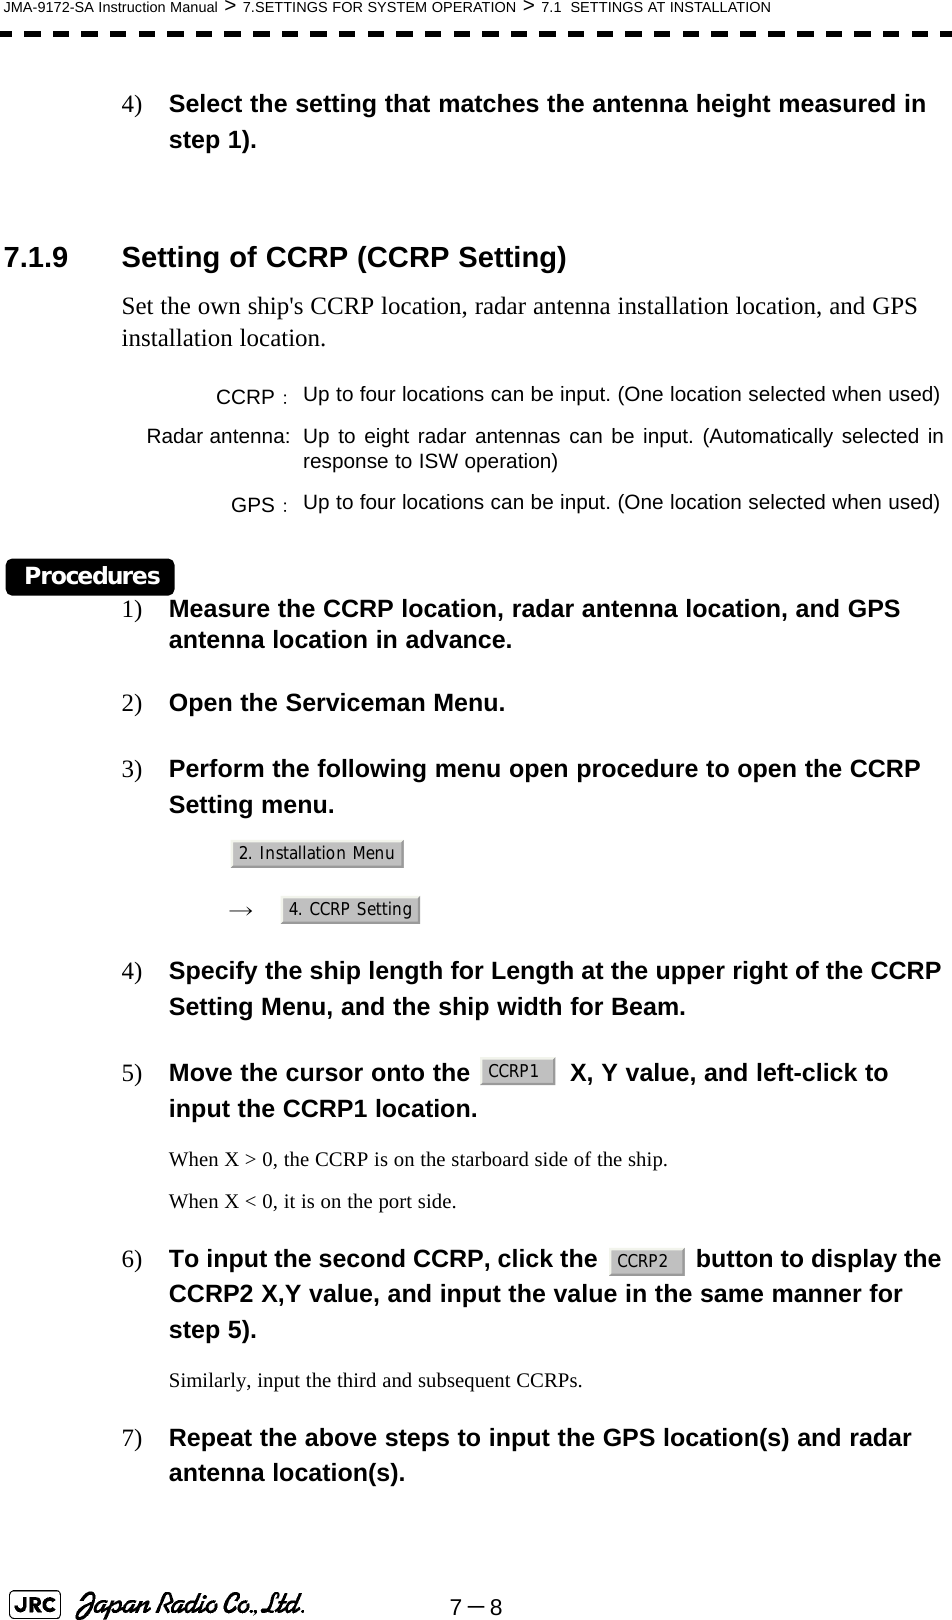 7－8JMA-9172-SA Instruction Manual &gt; 7.SETTINGS FOR SYSTEM OPERATION &gt; 7.1  SETTINGS AT INSTALLATION4) Select the setting that matches the antenna height measured in step 1). 7.1.9 Setting of CCRP (CCRP Setting)Set the own ship&apos;s CCRP location, radar antenna installation location, and GPS installation location.Procedures1) Measure the CCRP location, radar antenna location, and GPS antenna location in advance.2) Open the Serviceman Menu.3) Perform the following menu open procedure to open the CCRP Setting menu.　　 →　4) Specify the ship length for Length at the upper right of the CCRP Setting Menu, and the ship width for Beam.5) Move the cursor onto the   X, Y value, and left-click to input the CCRP1 location.When X &gt; 0, the CCRP is on the starboard side of the ship.When X &lt; 0, it is on the port side.6) To input the second CCRP, click the   button to display the CCRP2 X,Y value, and input the value in the same manner for step 5).Similarly, input the third and subsequent CCRPs.7) Repeat the above steps to input the GPS location(s) and radar antenna location(s).CCRP：Up to four locations can be input. (One location selected when used)Radar antenna: Up to eight radar antennas can be input. (Automatically selected inresponse to ISW operation)GPS：Up to four locations can be input. (One location selected when used)2. Installation Menu4. CCRP SettingCCRP1CCRP2